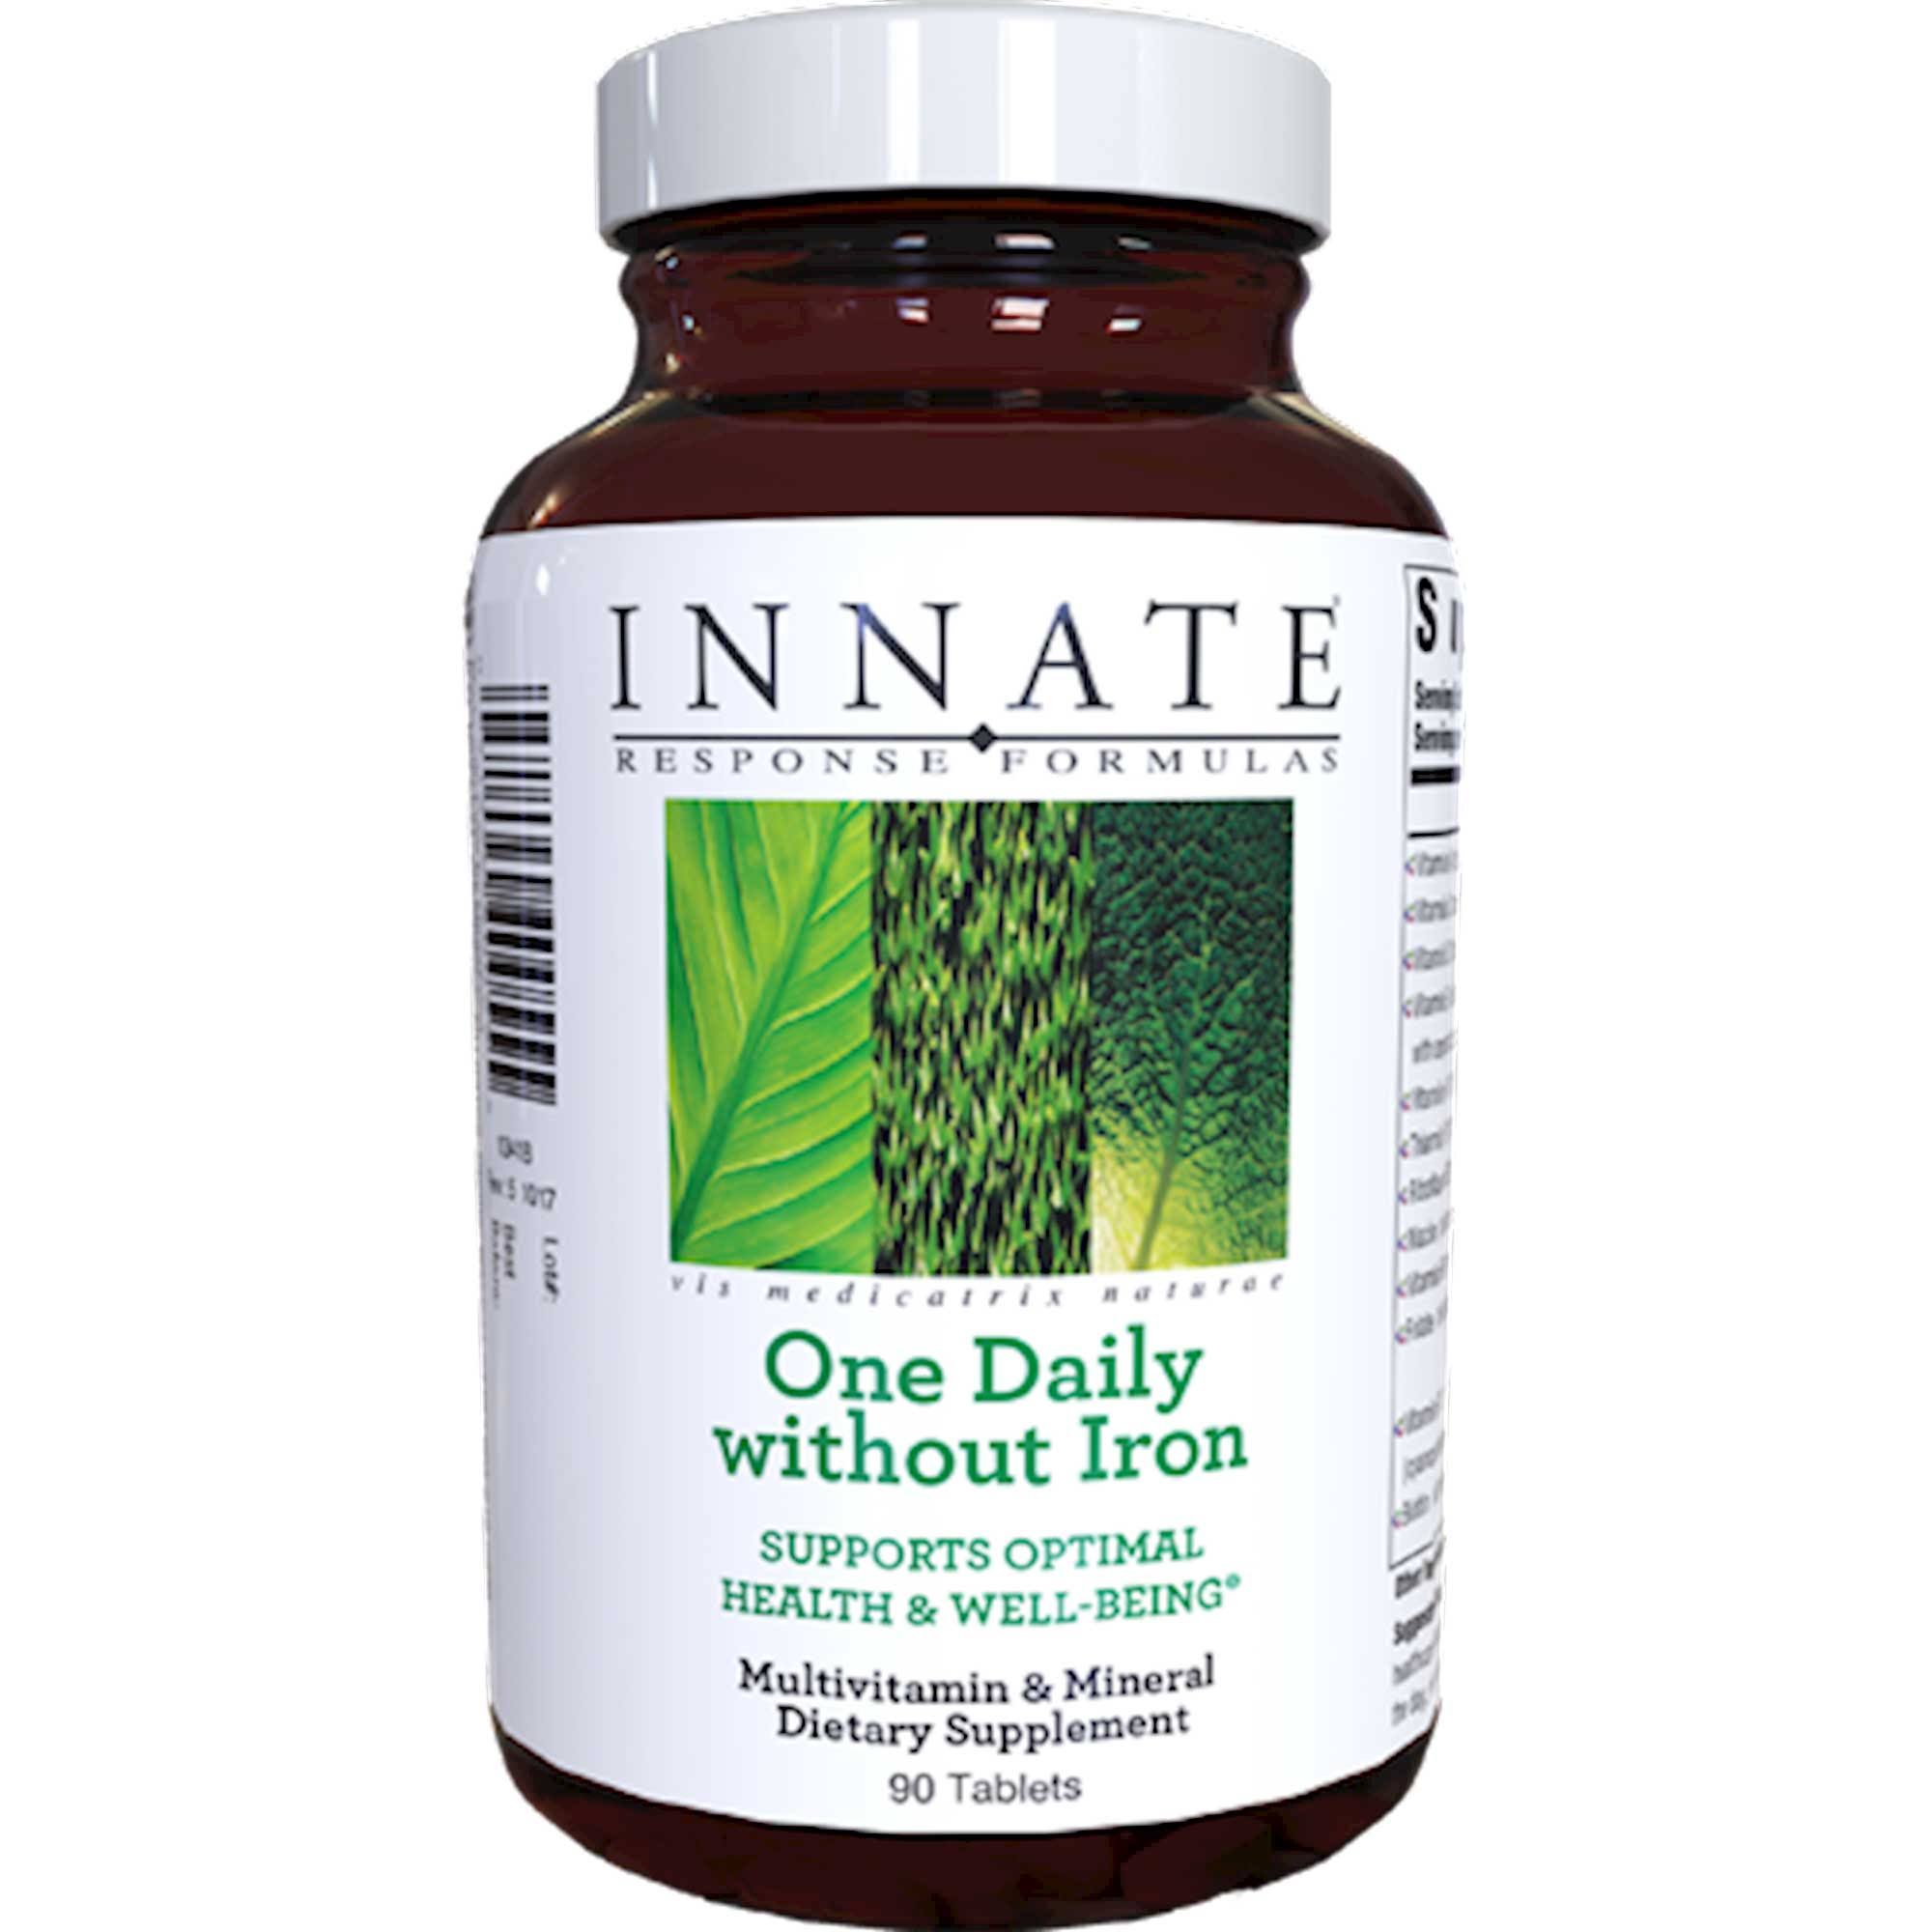 Innate Response Formulas One Daily without Iron Vitamin Supplement - 90 Tablets